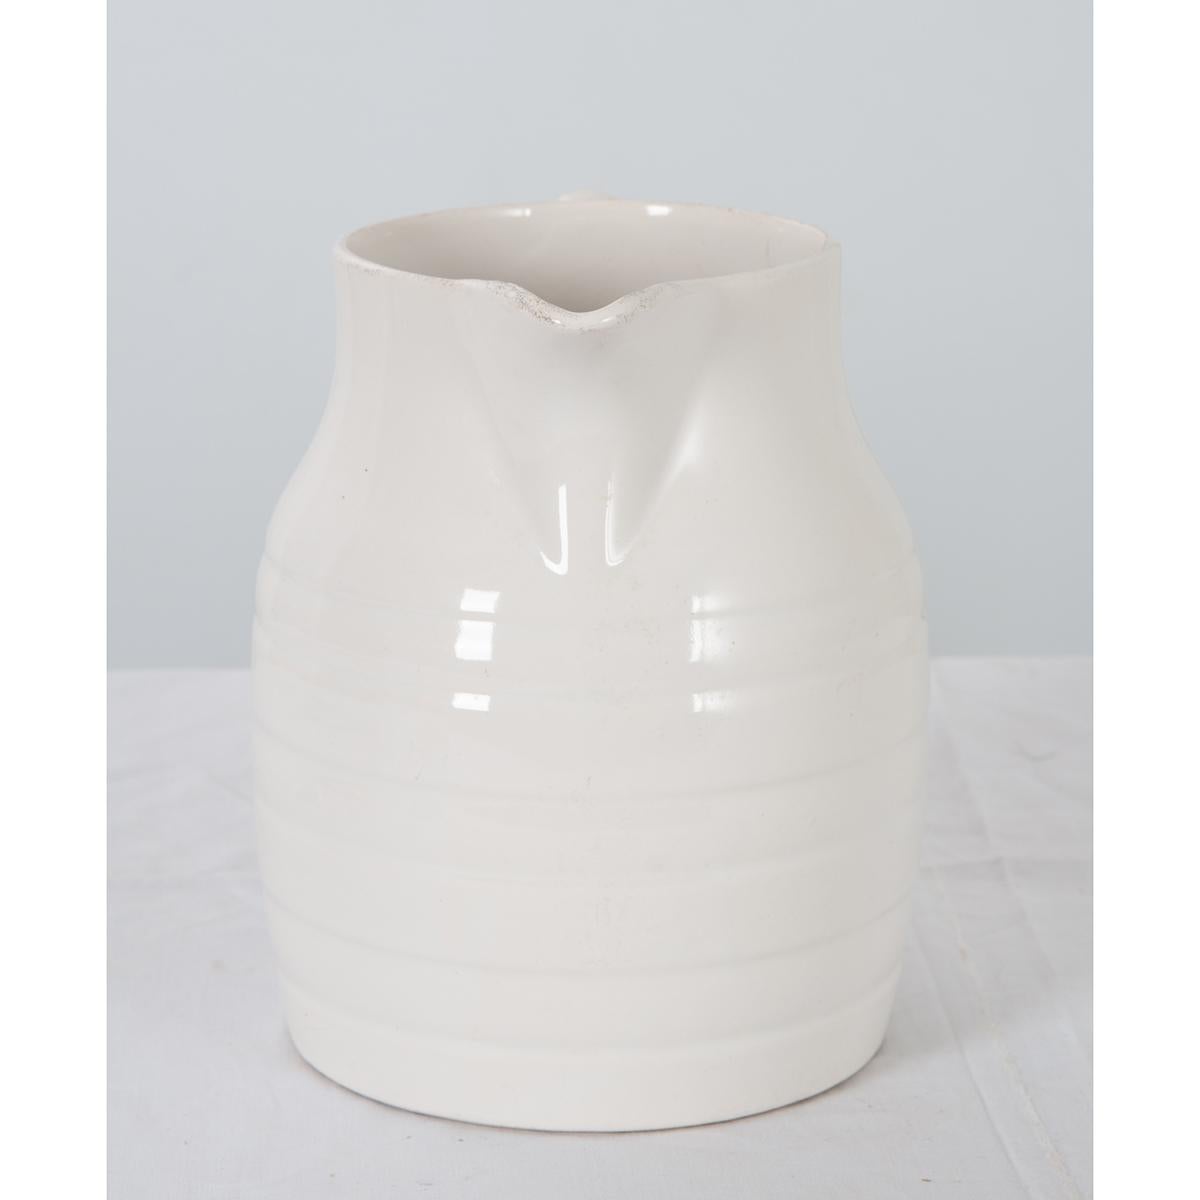 A wonderful early 20th century white ironstone pitcher, from Staffordshire, England, circa 1920. Having raised stripes that encircle the vessel, this mono-chromed white pitcher will add a touch of rustic sophistication to any room. Its loop ear